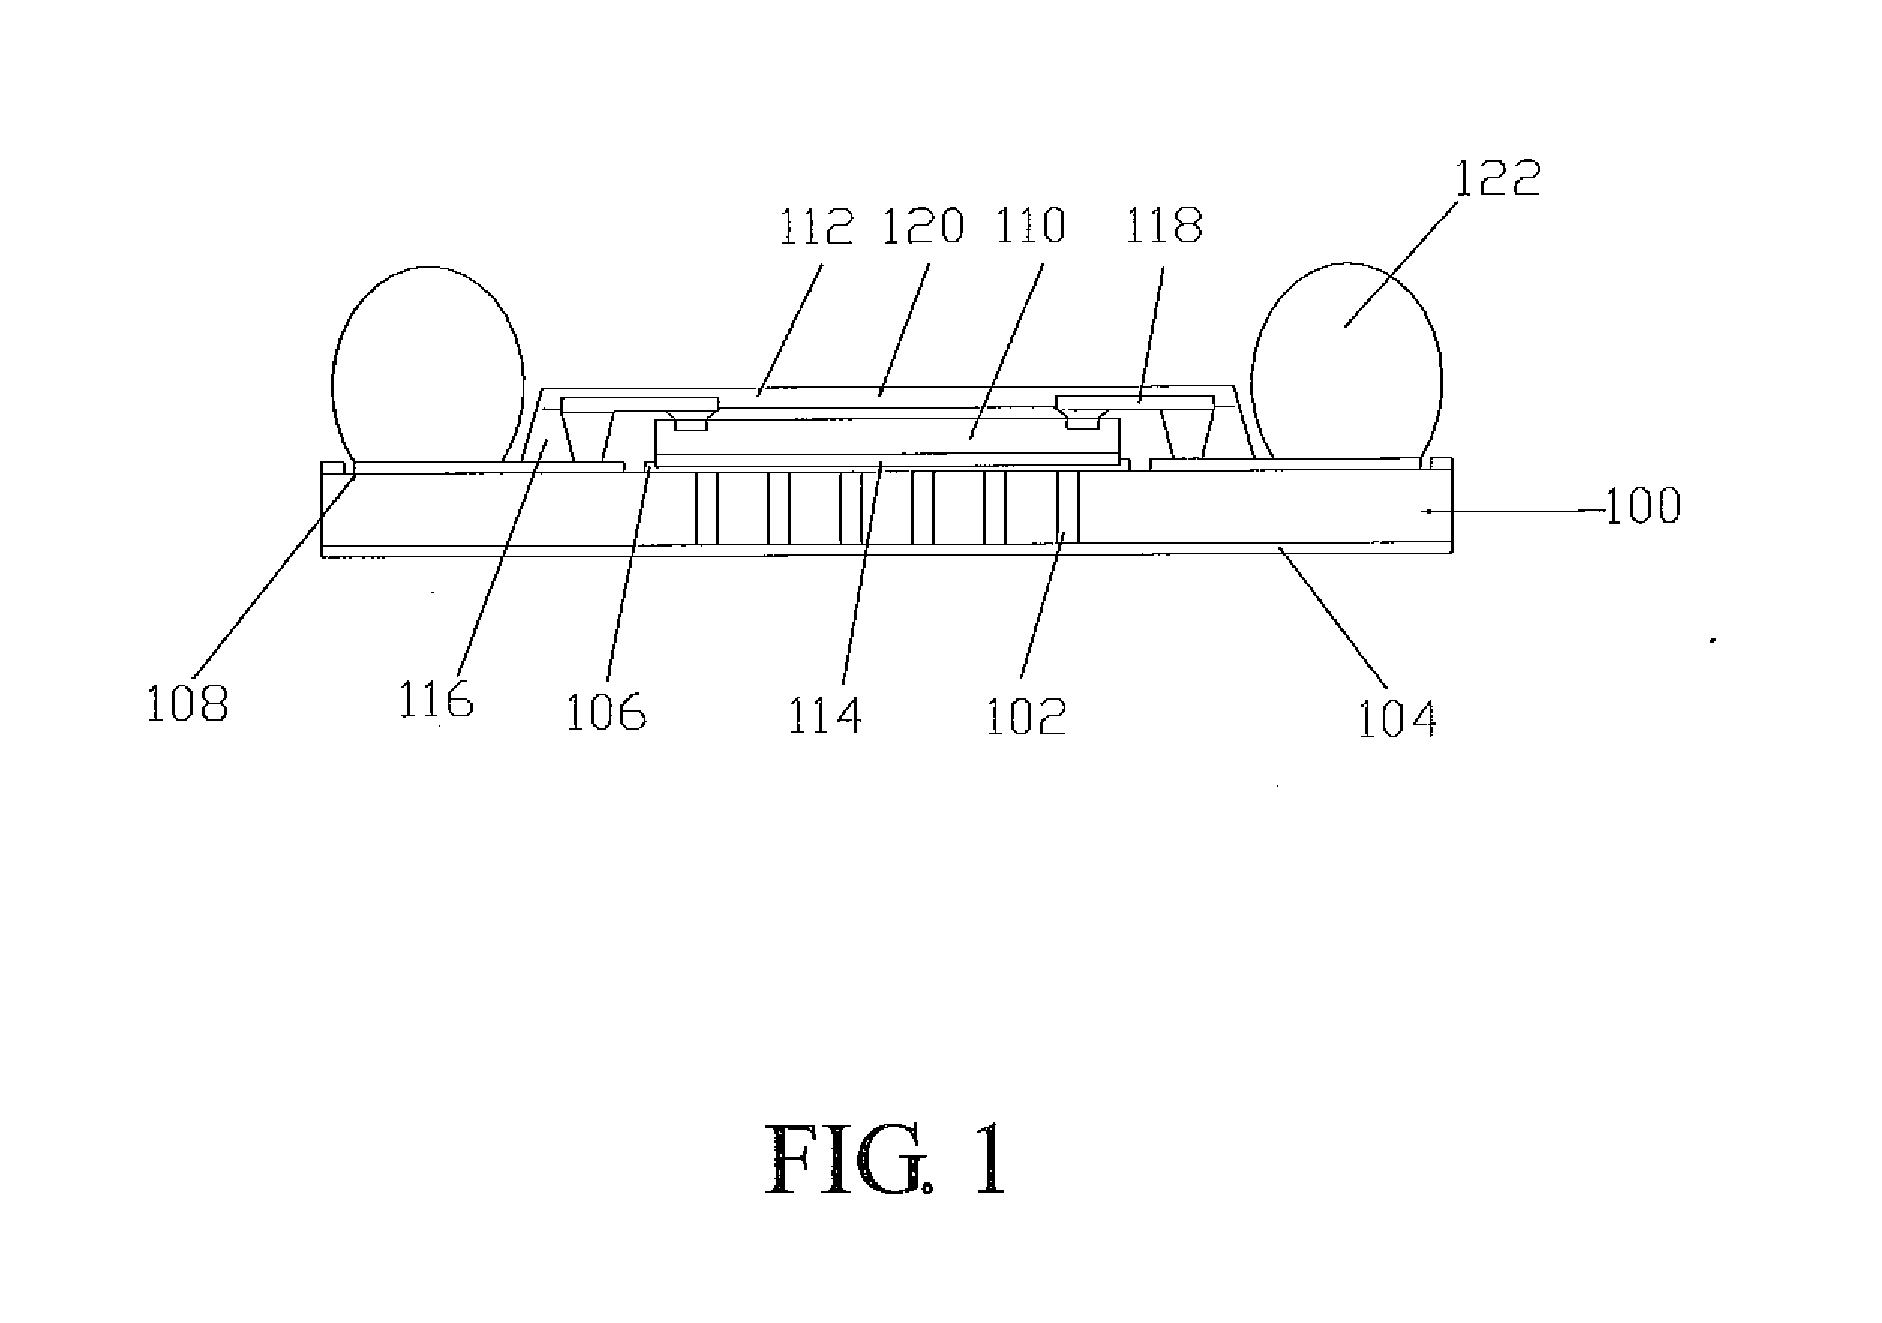 Semiconductor device package to improve functions of heat sink and ground shield